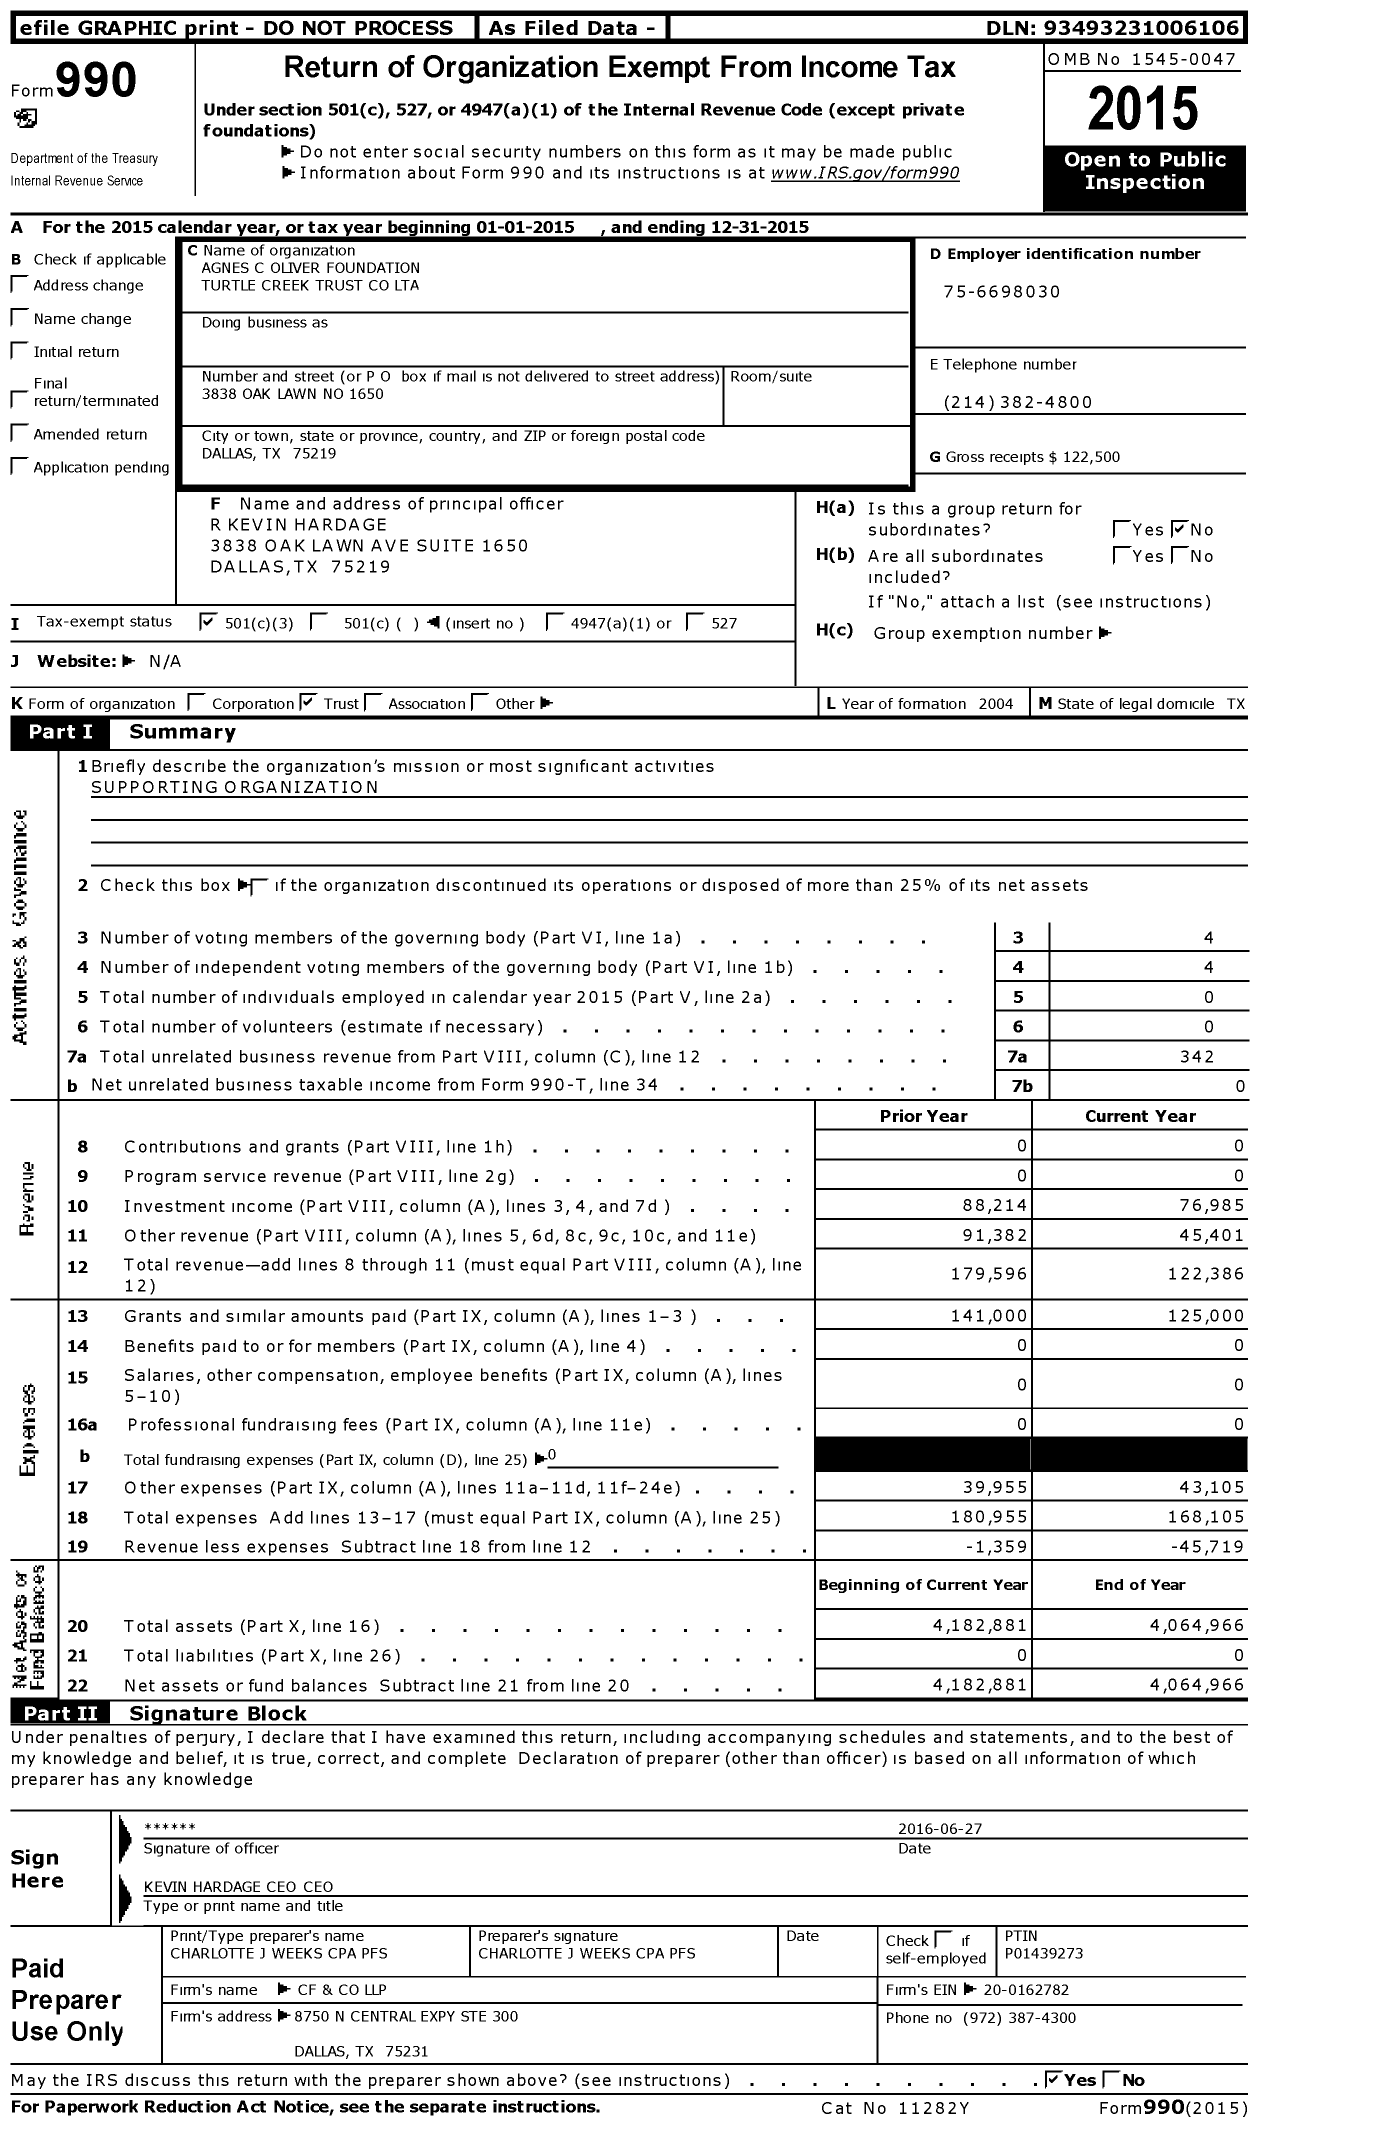 Image of first page of 2015 Form 990 for Agnes C Oliver Foundation Turtle Creek Trust Co LTA